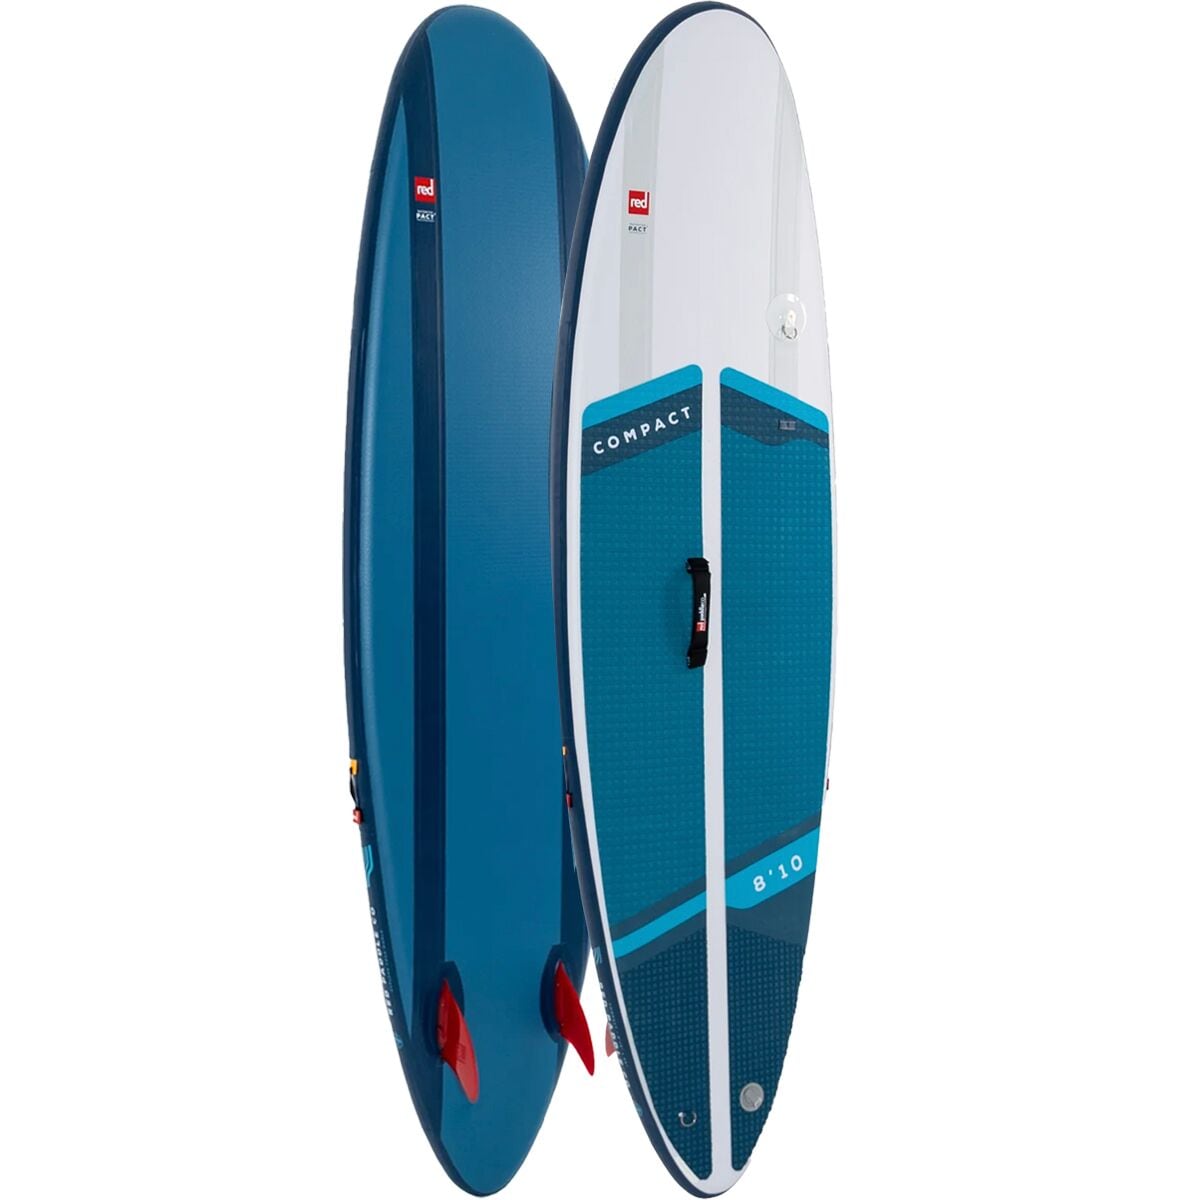 Red Paddle Co. Compact MSL 8ft 10in Inflatable Stand-Up Paddleboard - 2023